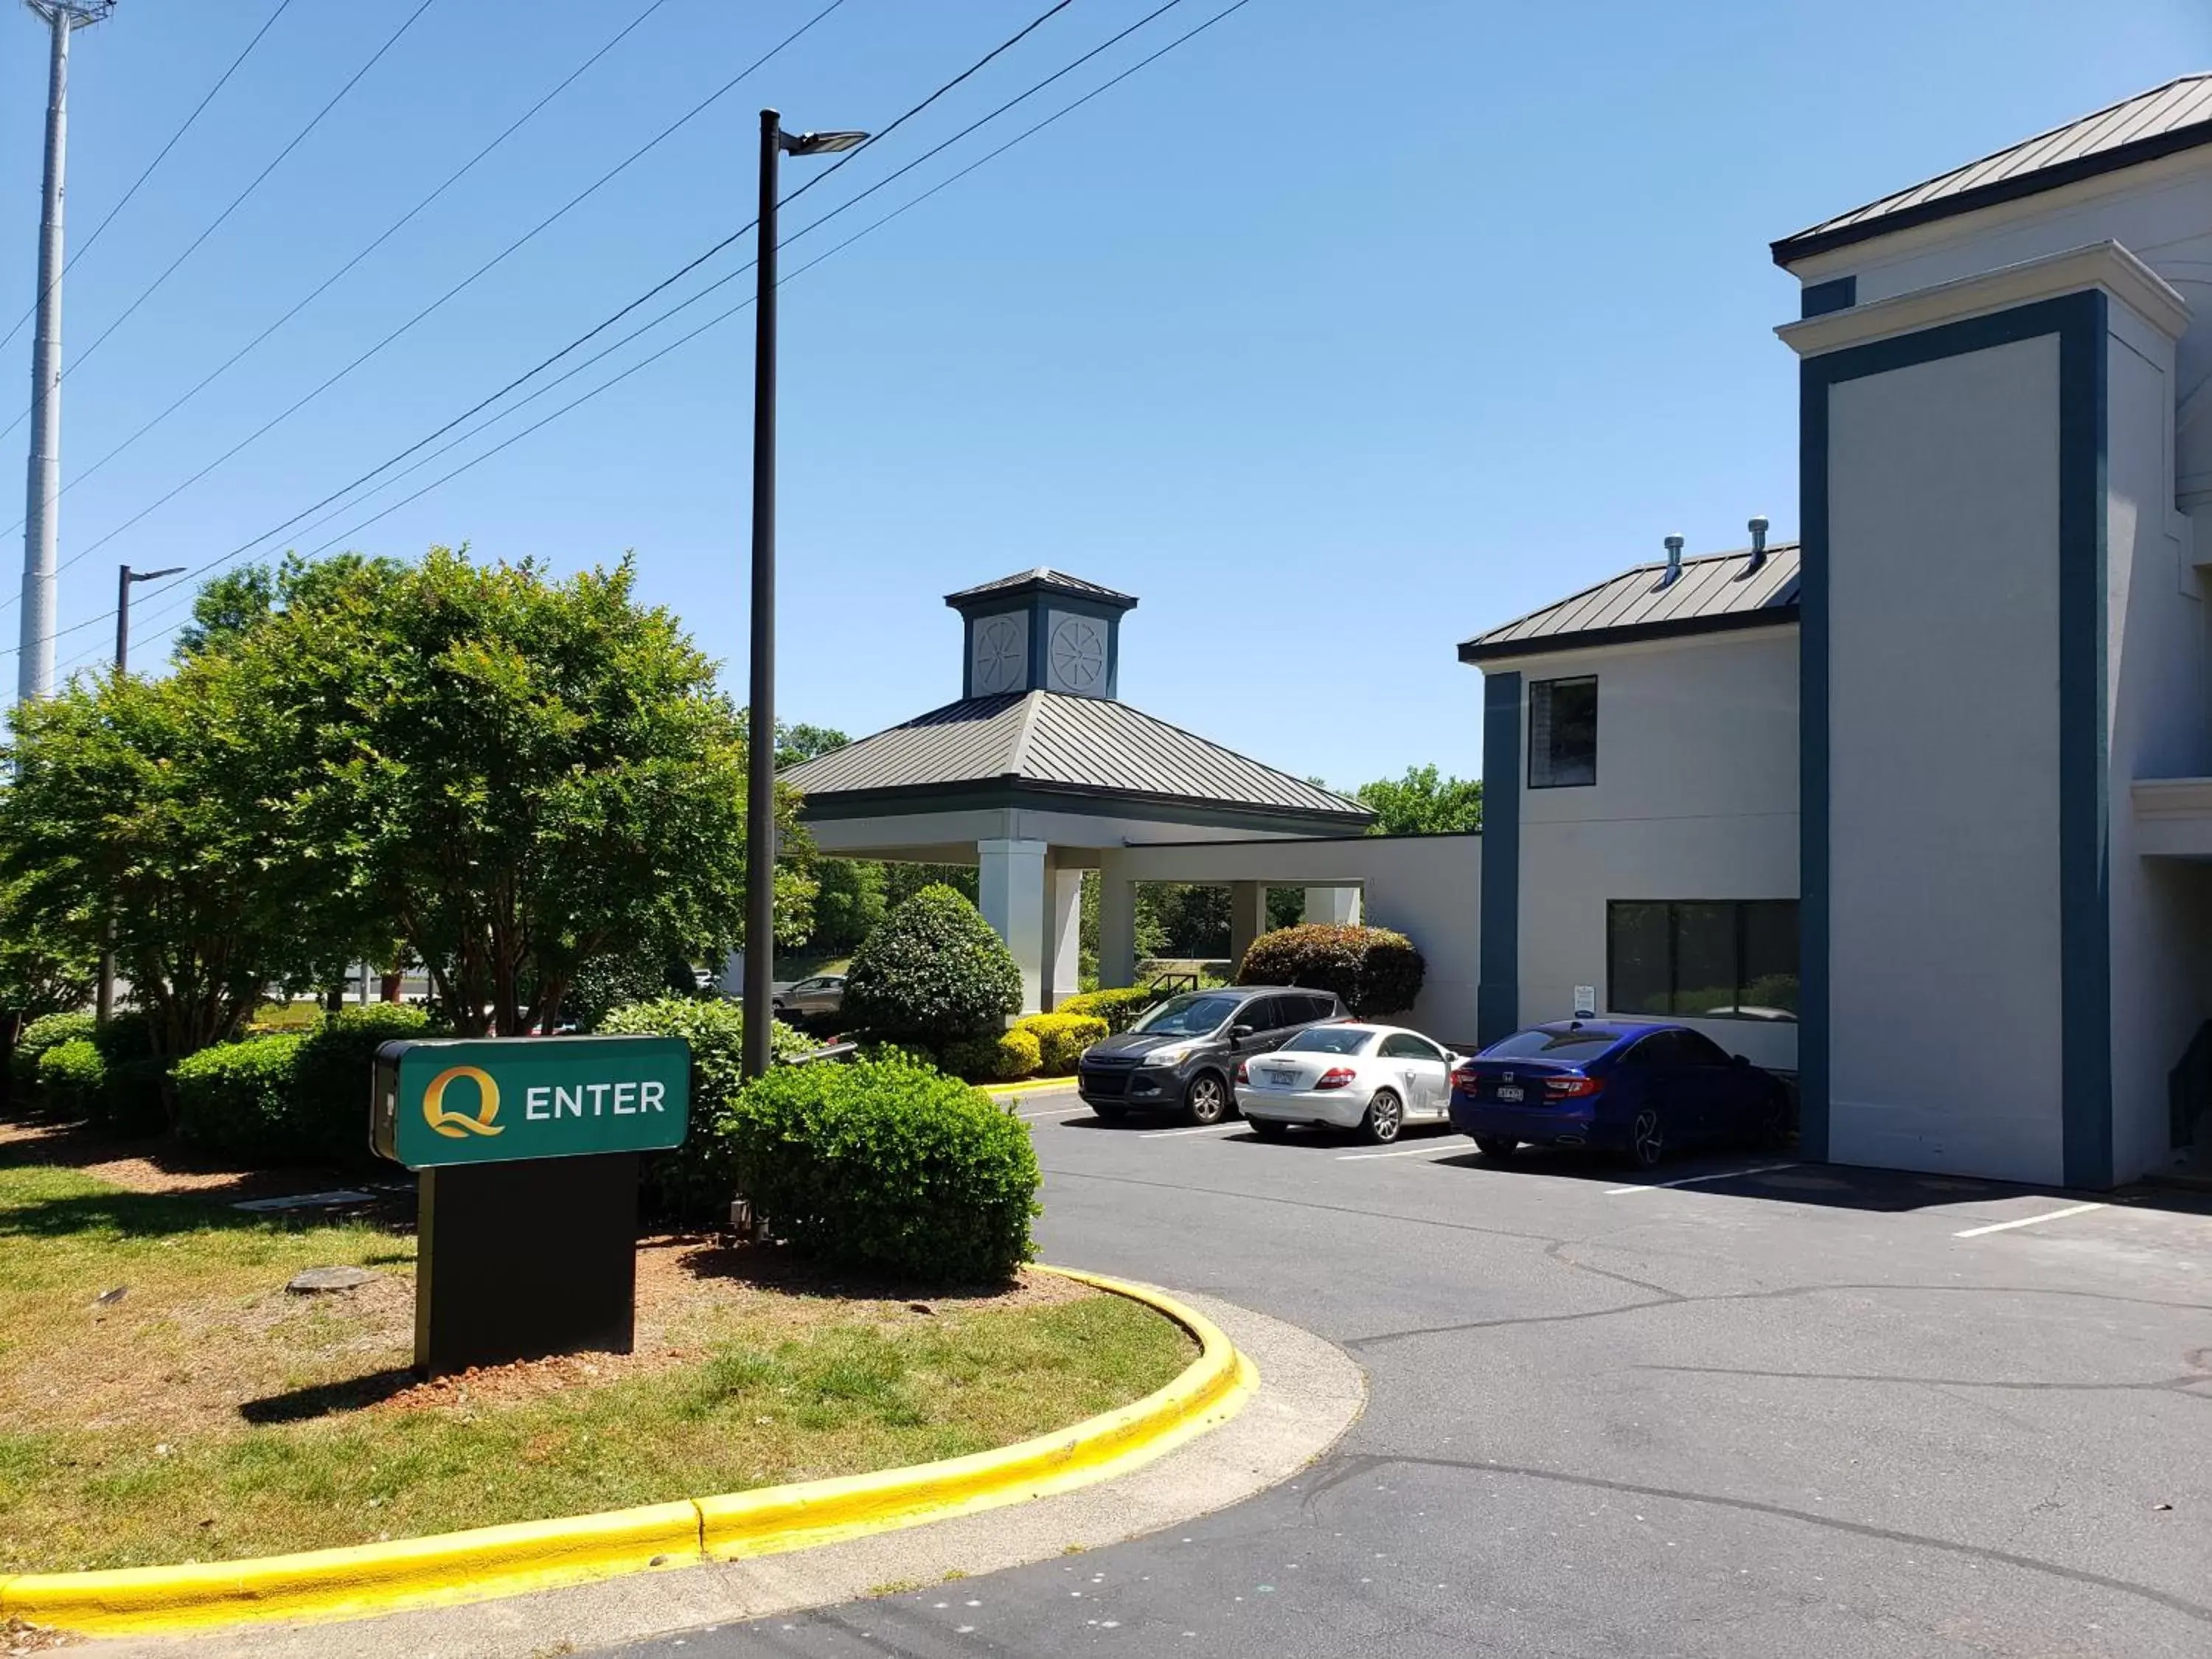 Property Building in Quality Inn & Suites Clemmons I-40